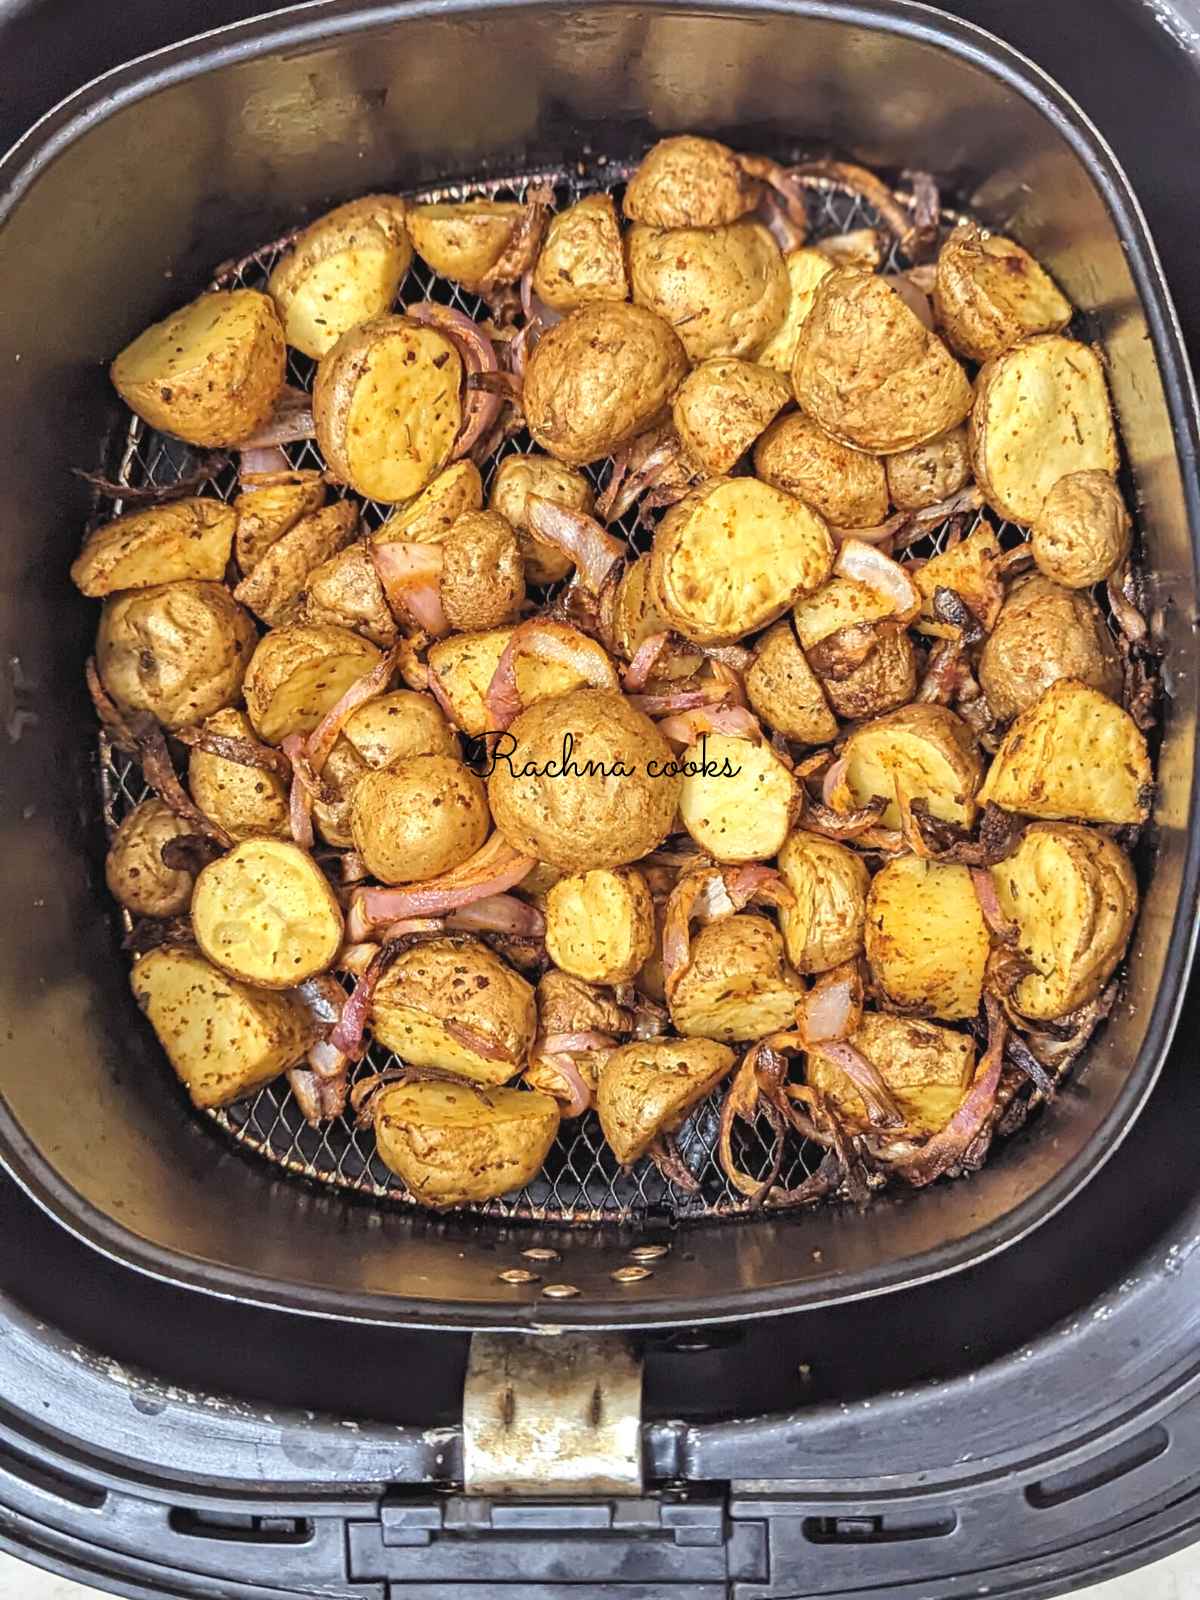 Roasted potatoes and onions in air fryer basket after air frying.